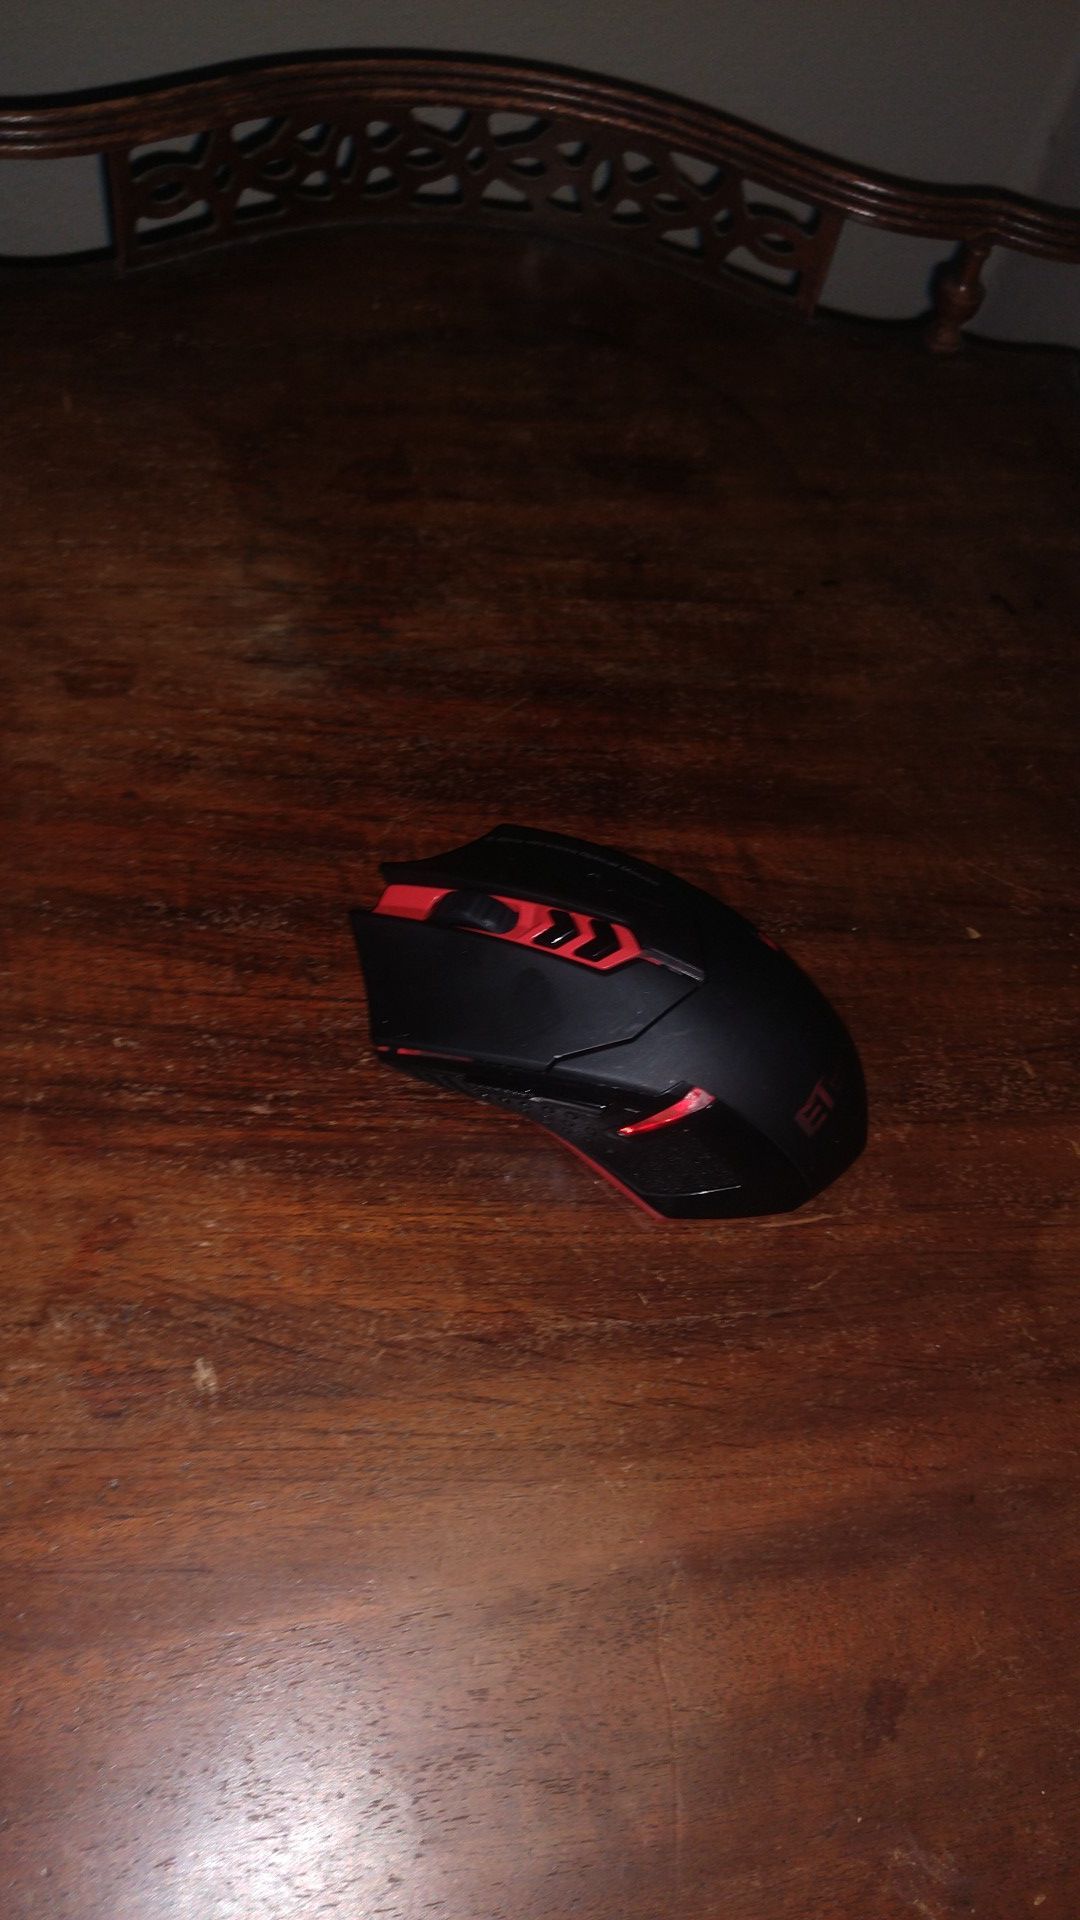 Red led mouse wireless